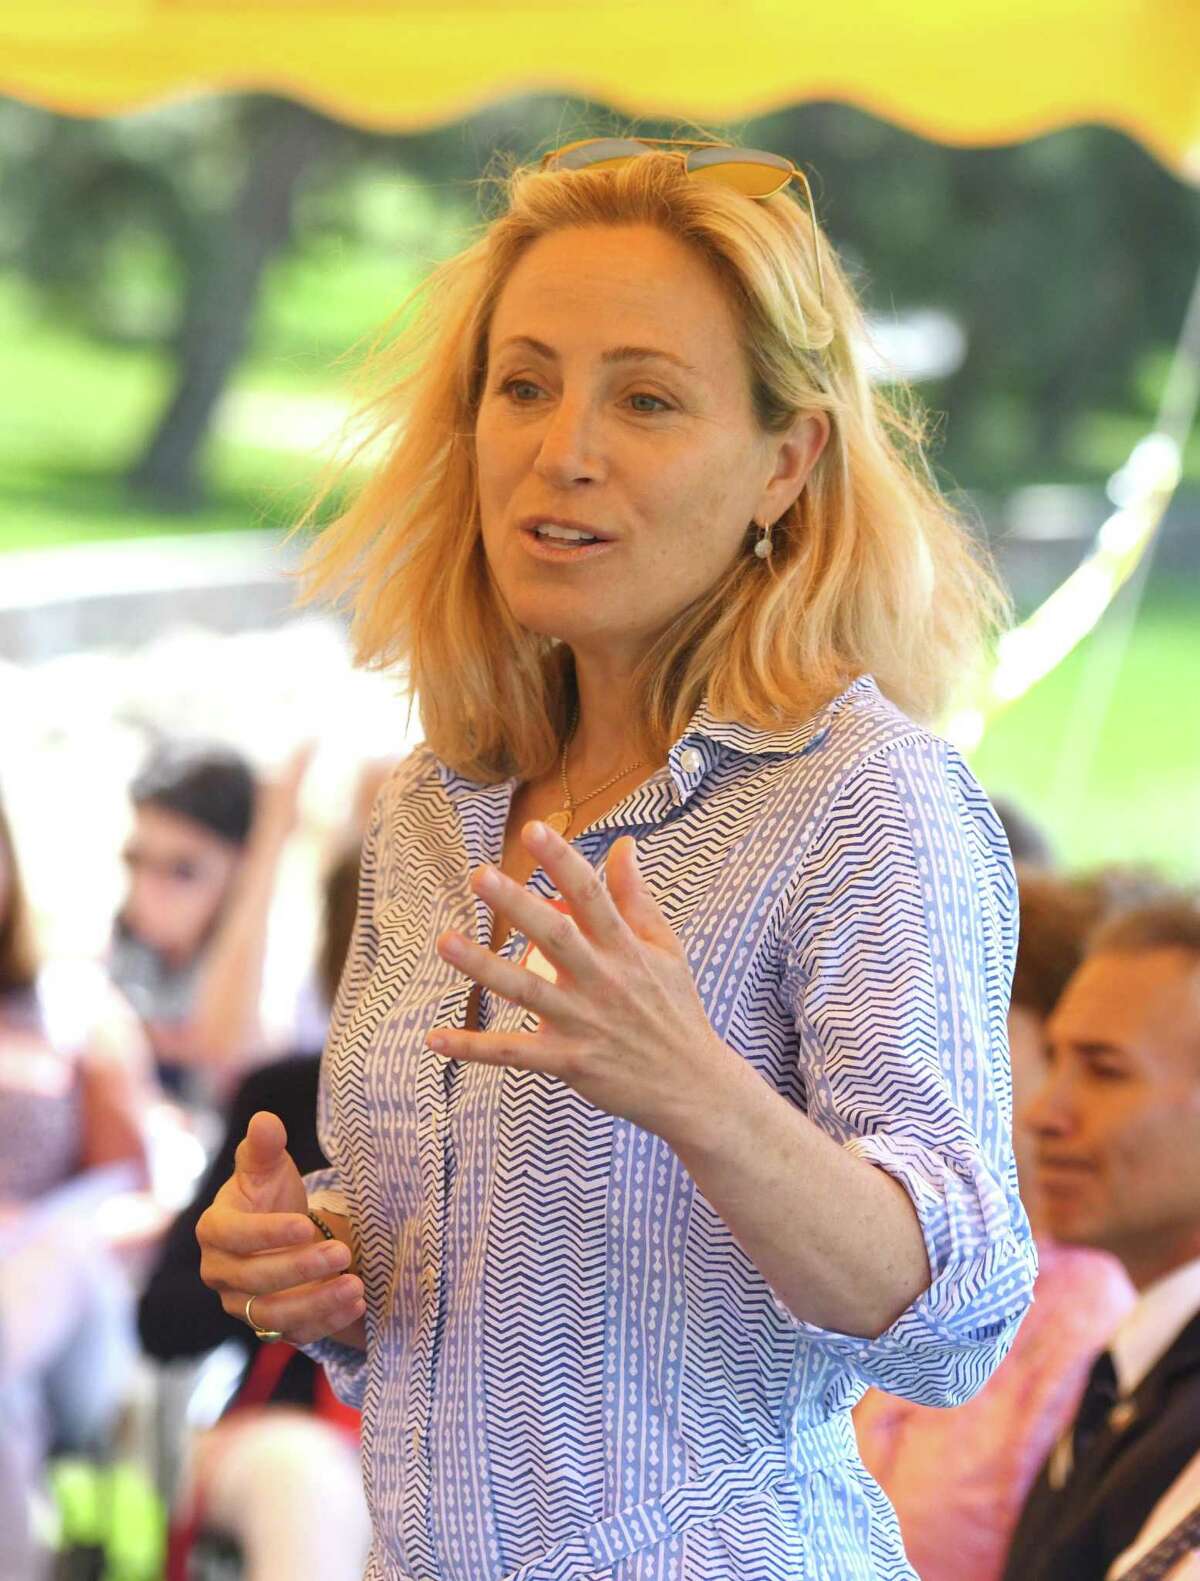 State Sen. Alex Kasser, D-Greenwich, speaks at the annual League of Women Voters legislative picnic last summer. The picnic is a league tradition but had to be done as a Zoom gathering on Wednesday due to the coronavirus pandemic.